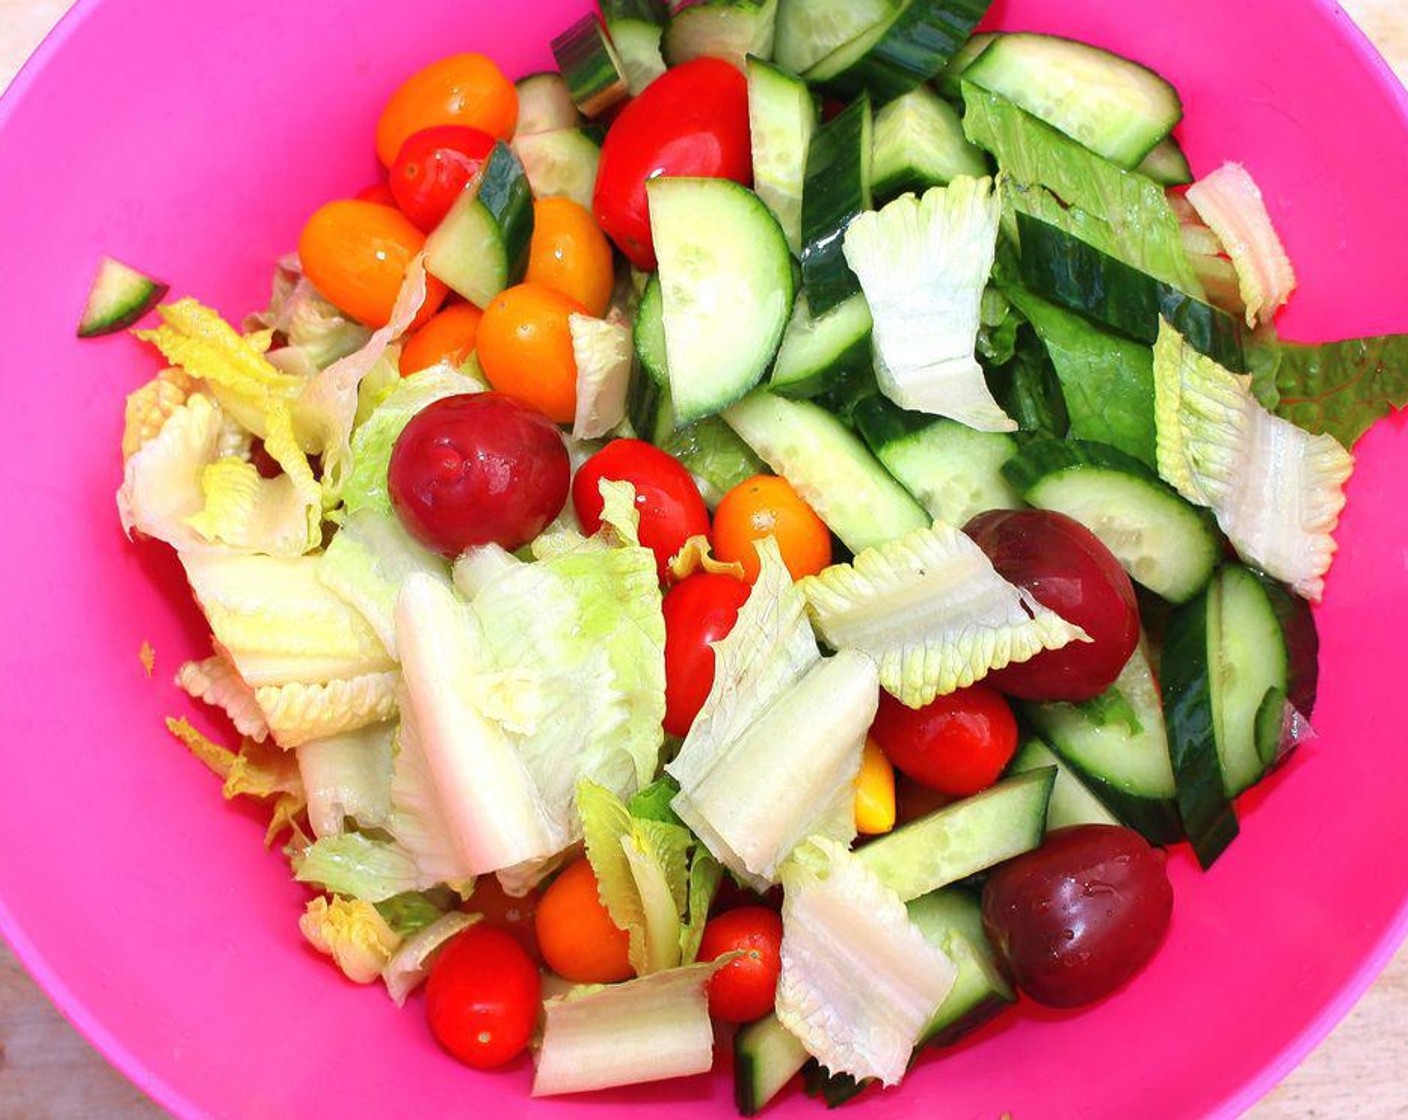 step 7 Dress romaine, Cherry Tomatoes (to taste), and cucumbers with Vinaigrette (to taste).